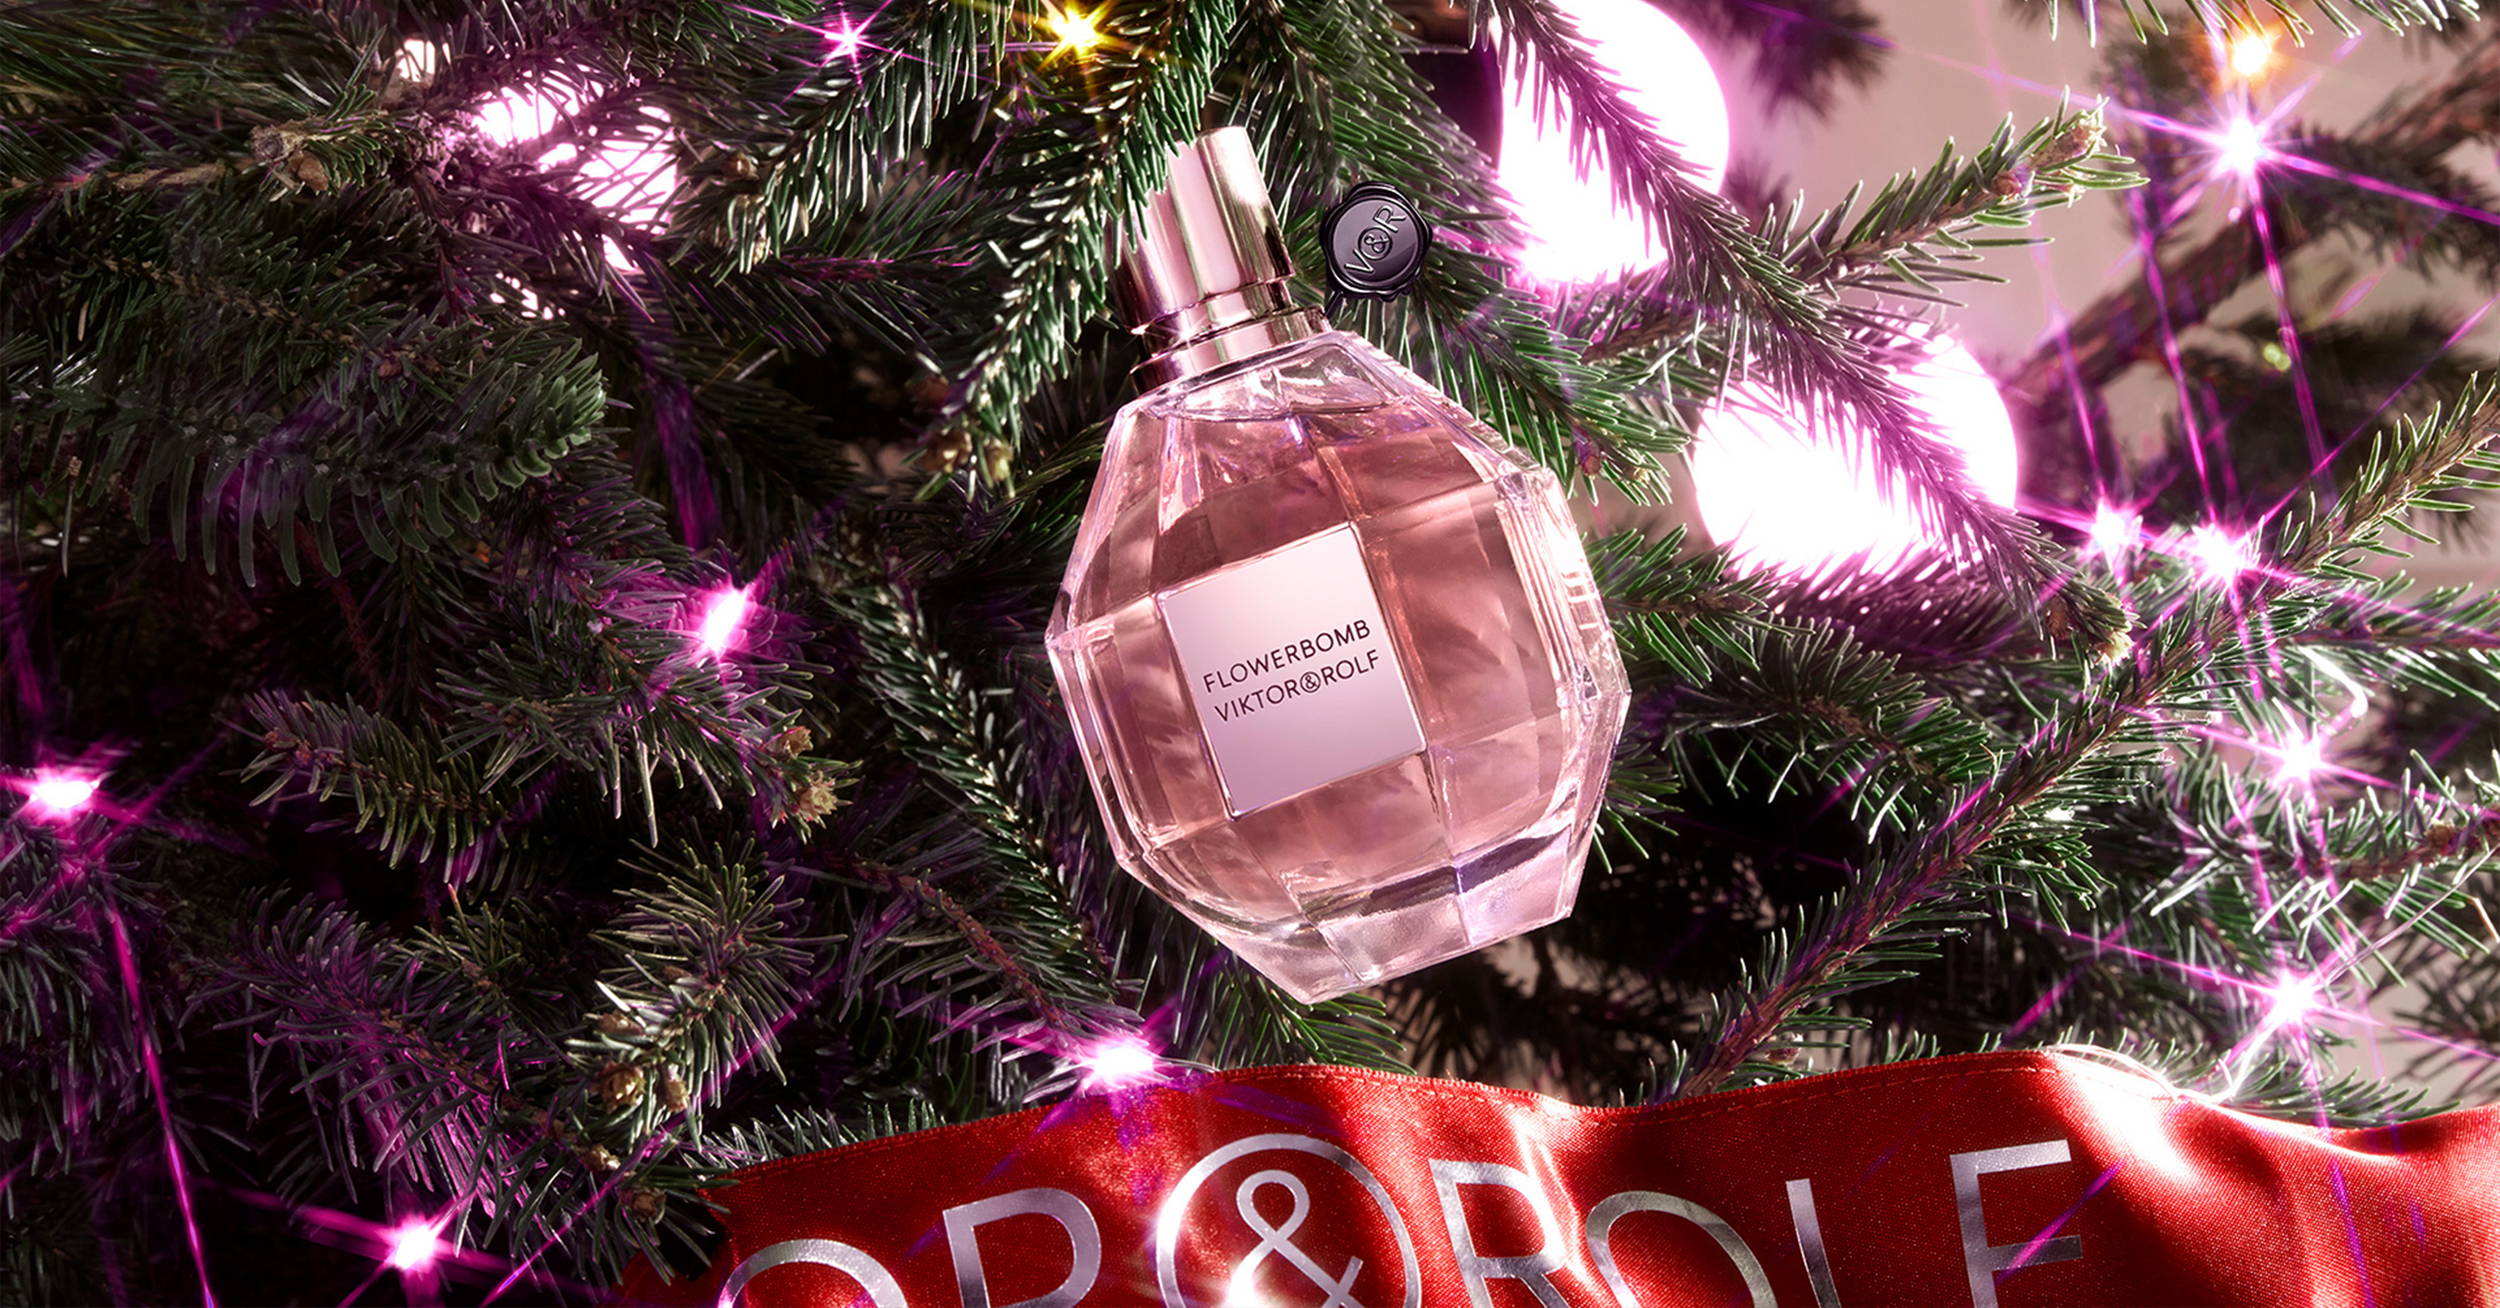 The Sweet Scent of Christmas